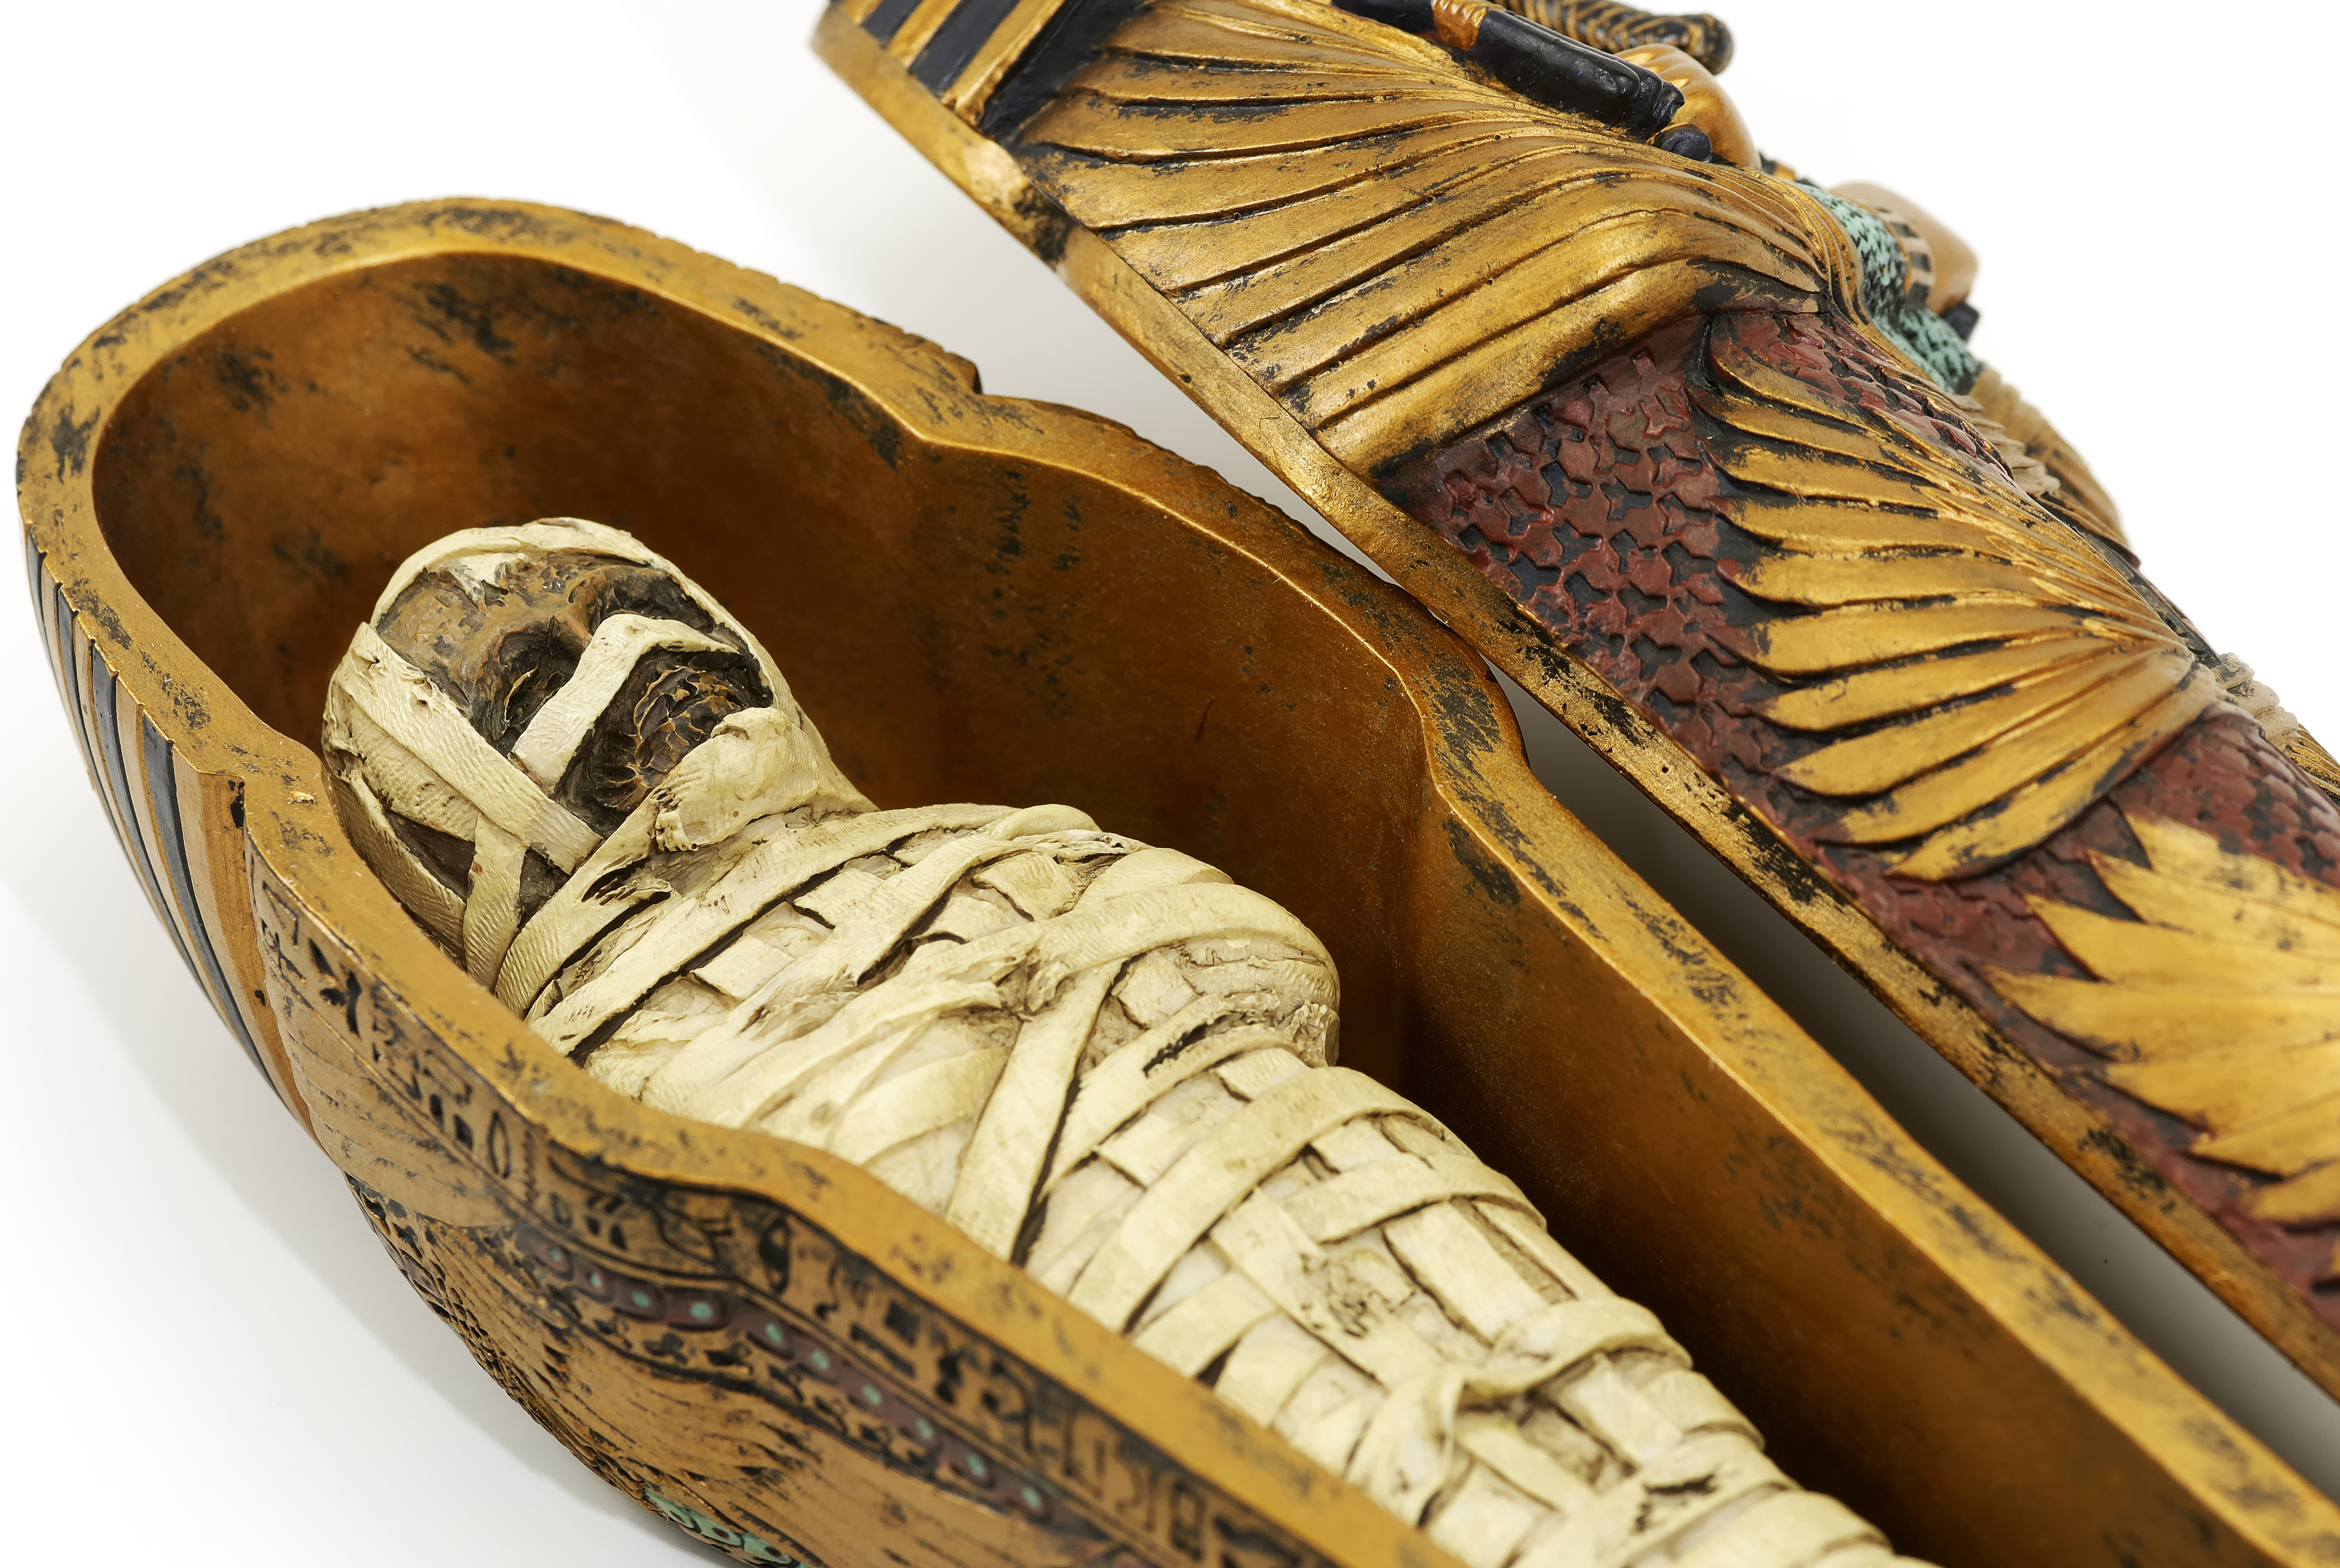 Two intricate Egyptian sarcophagi with a mummy inside one, symbolizing investment in historical artifacts